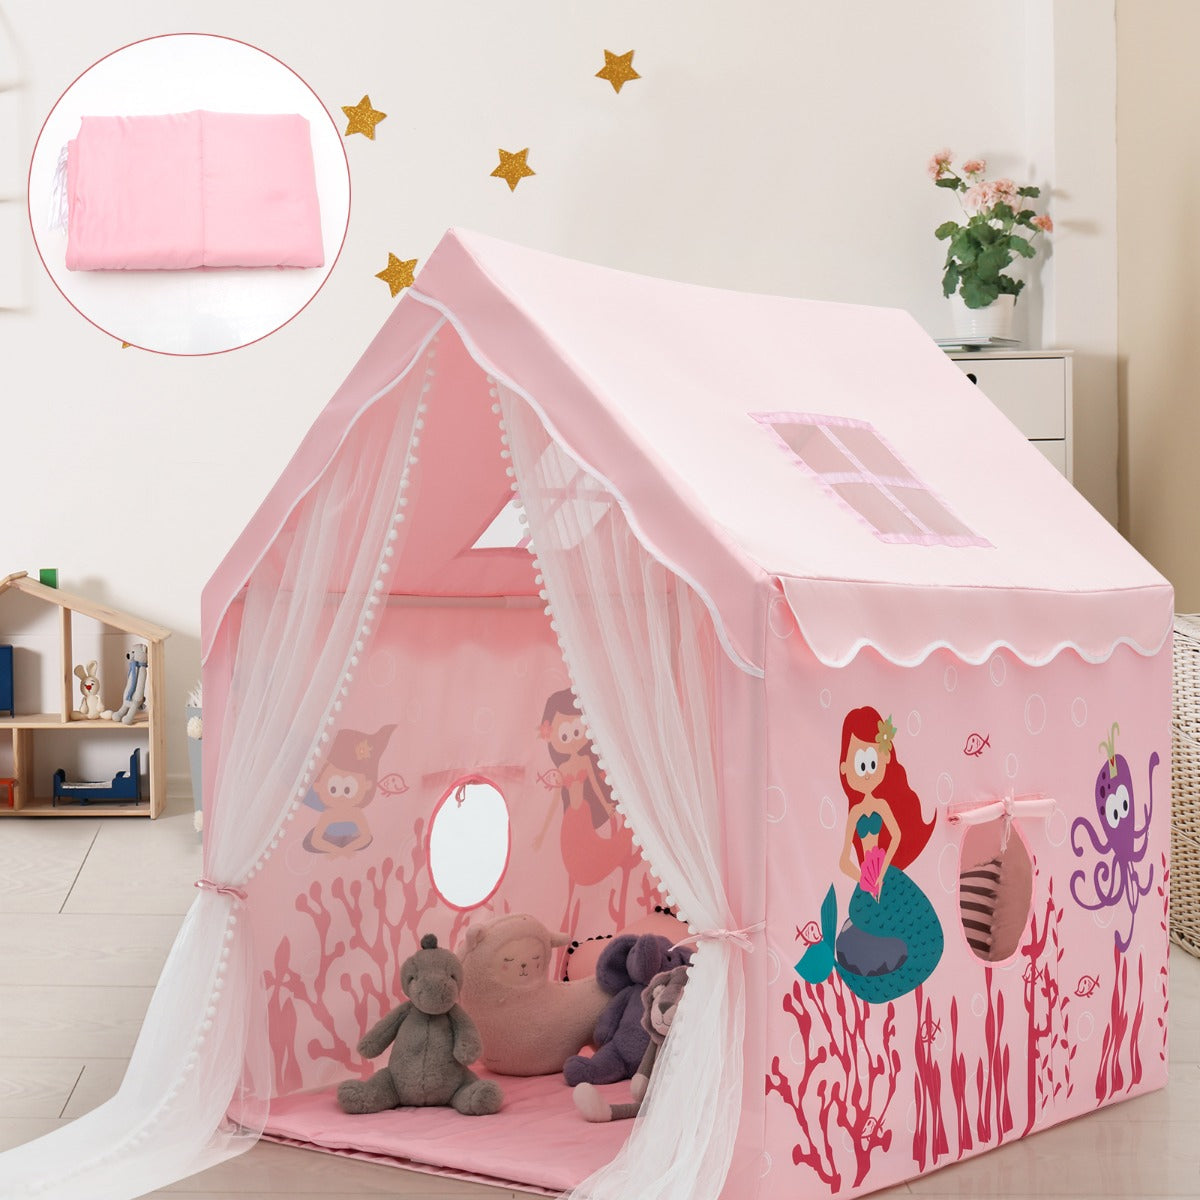 SENSORY CALMING PLAY TENT (WITH MAT INCLUDED)